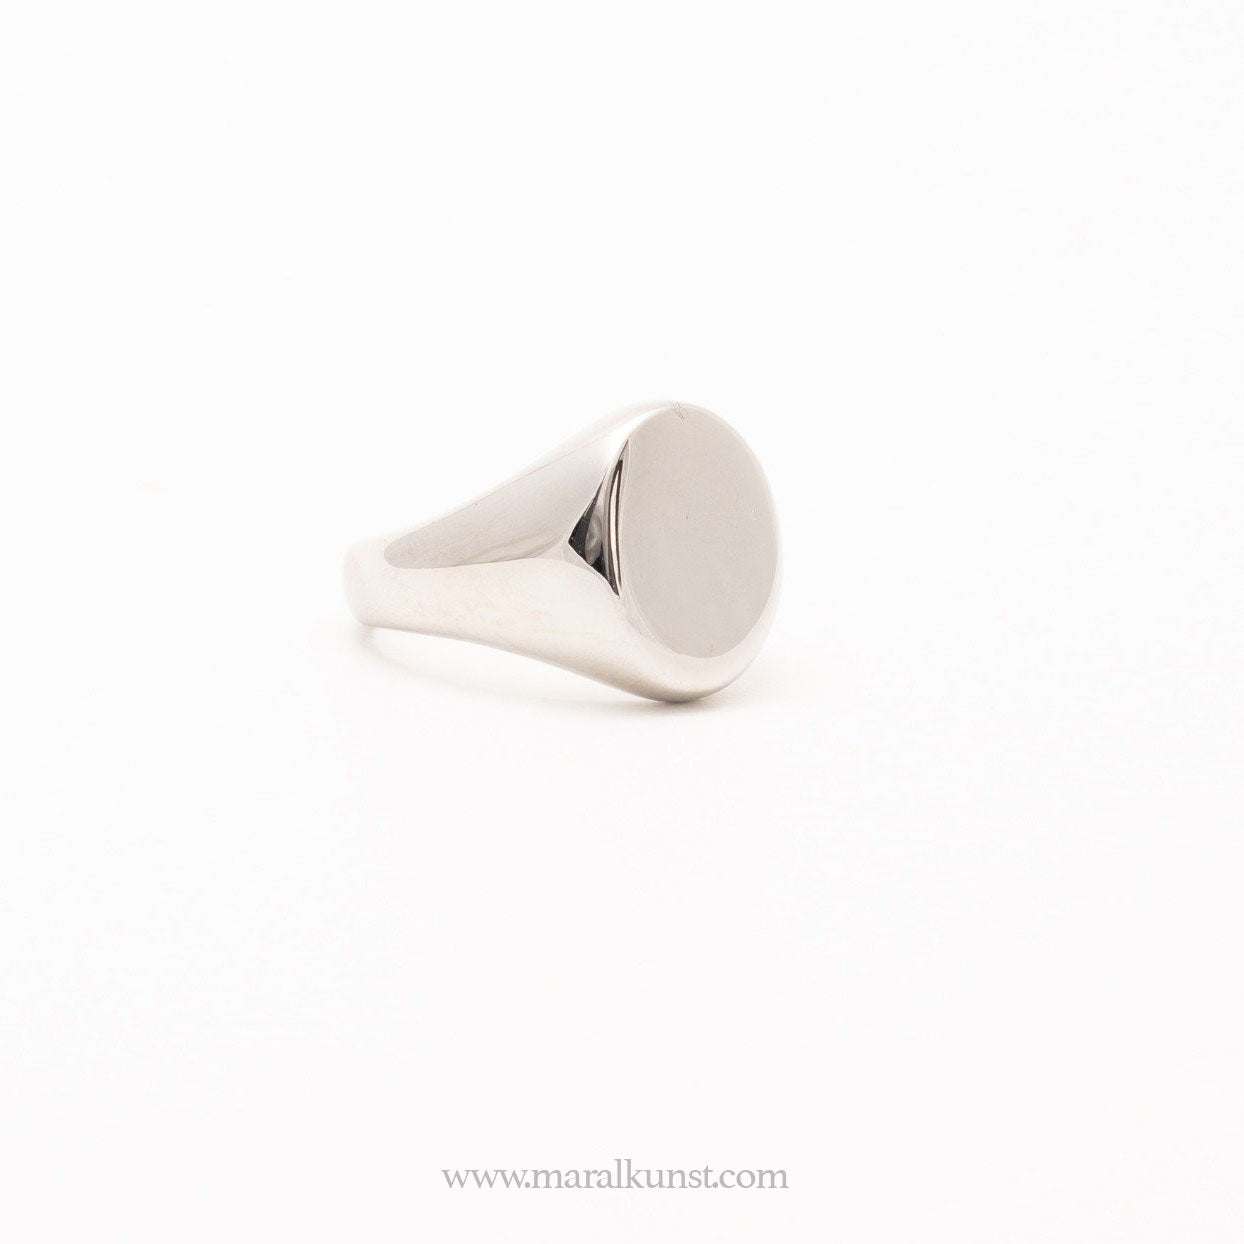 Shiny Signet Stainless Steel Ring